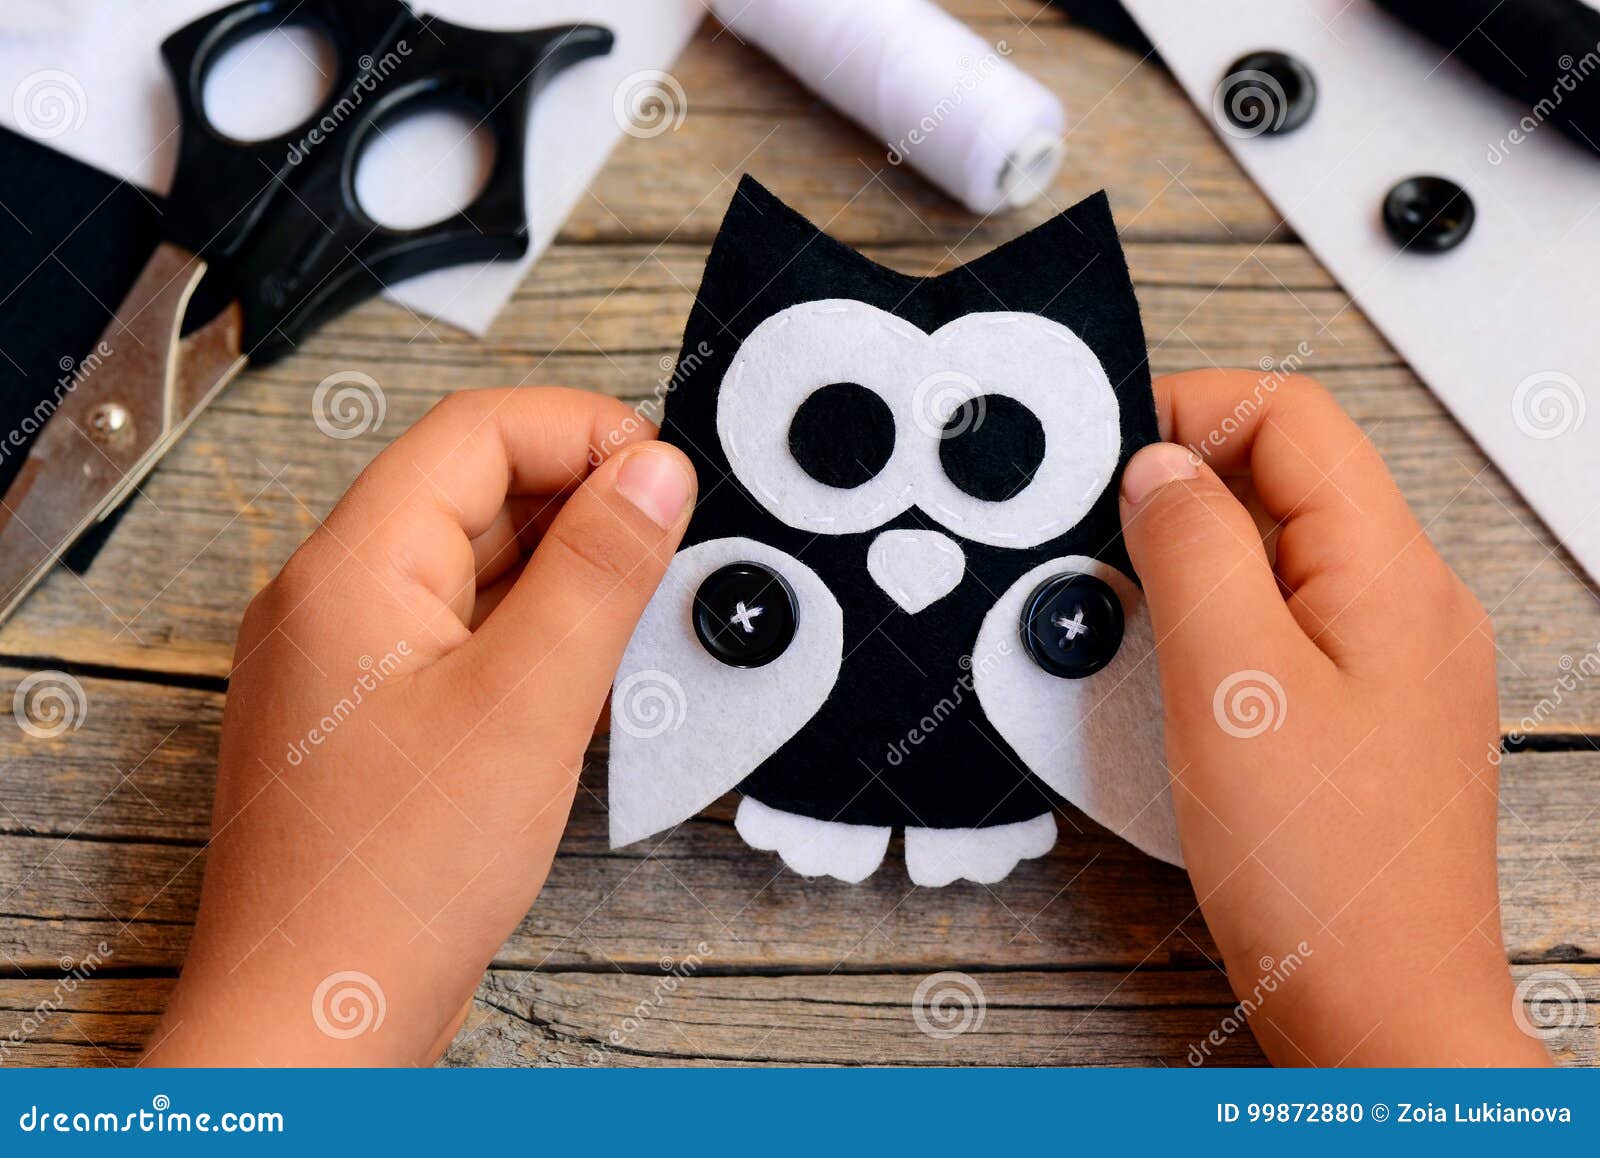 Child Made A Felt Owl Toy Child Holds A Felt Owl Crafts In